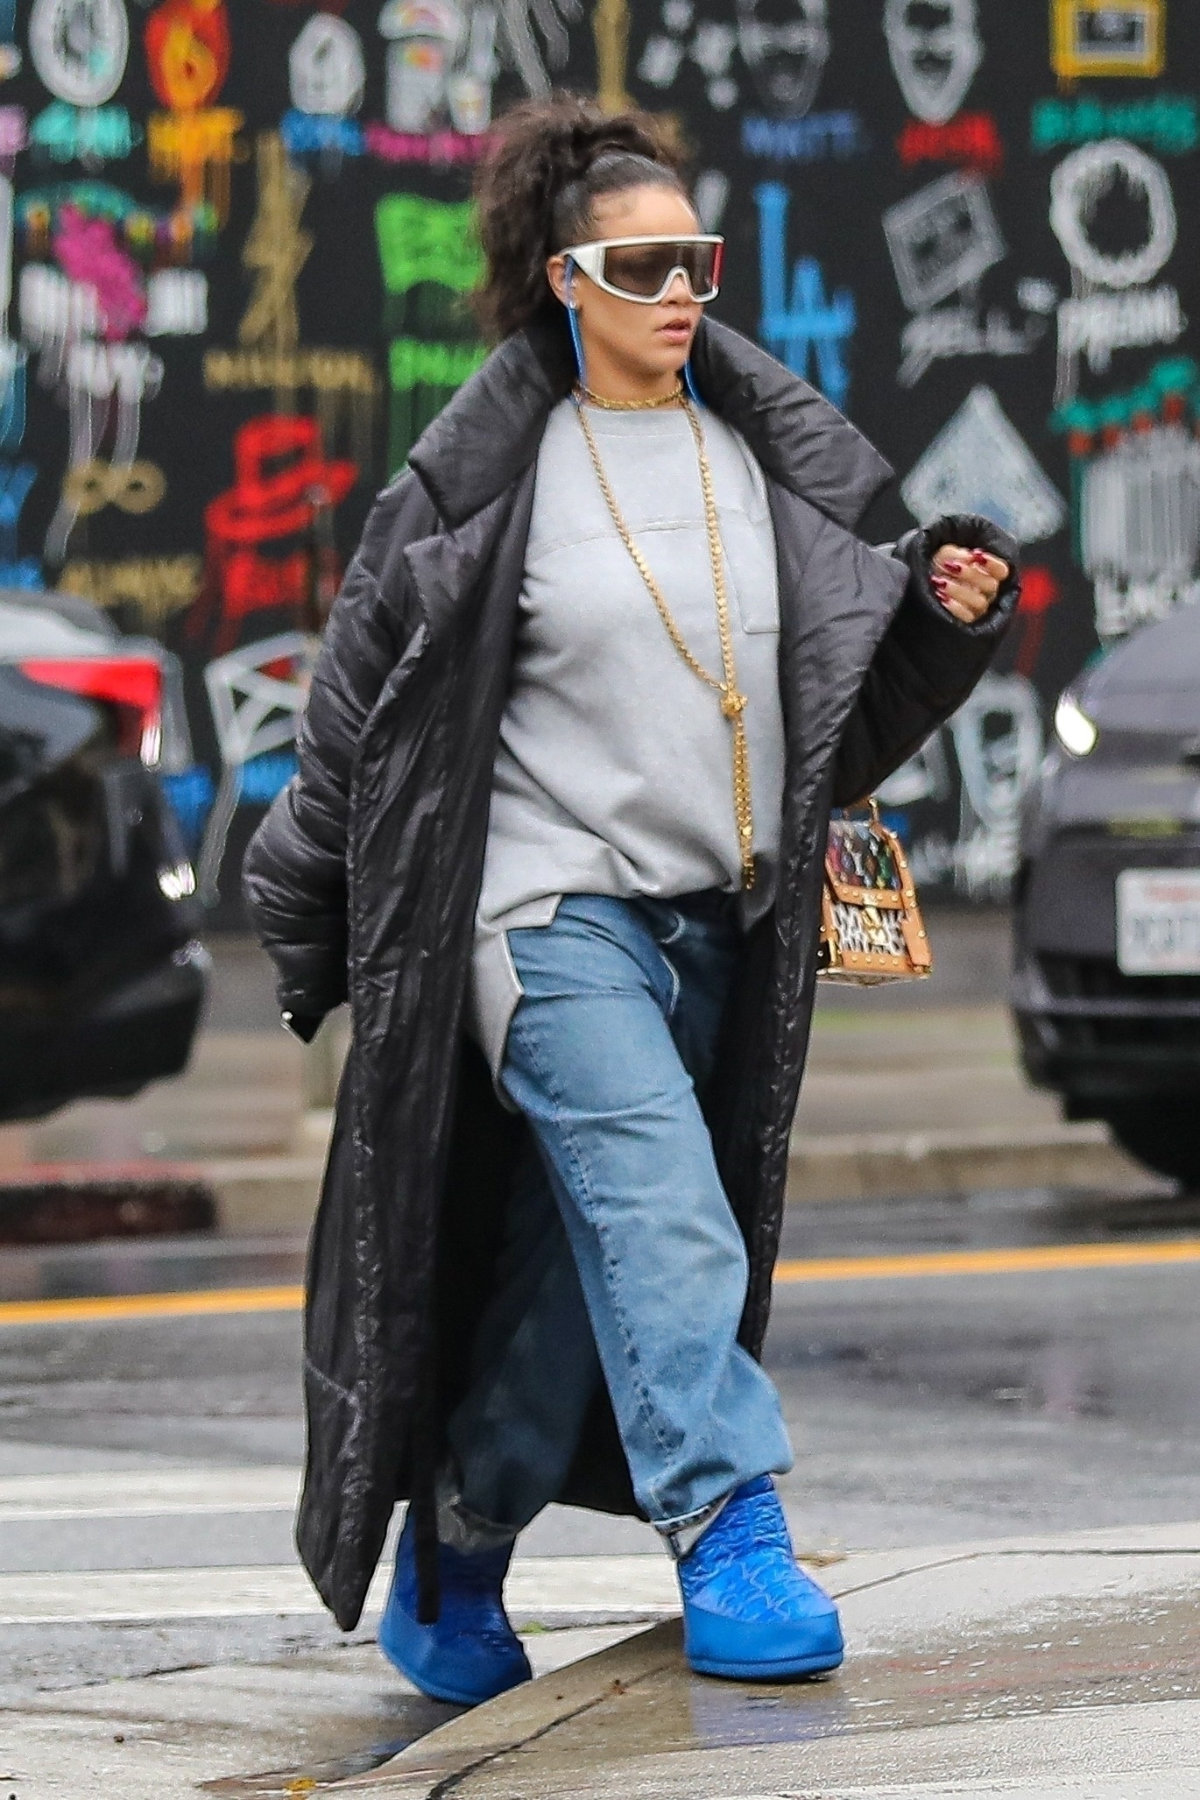 Rihanna Styles Out in Gucci Vault Moon Boots and Louis Vuitton